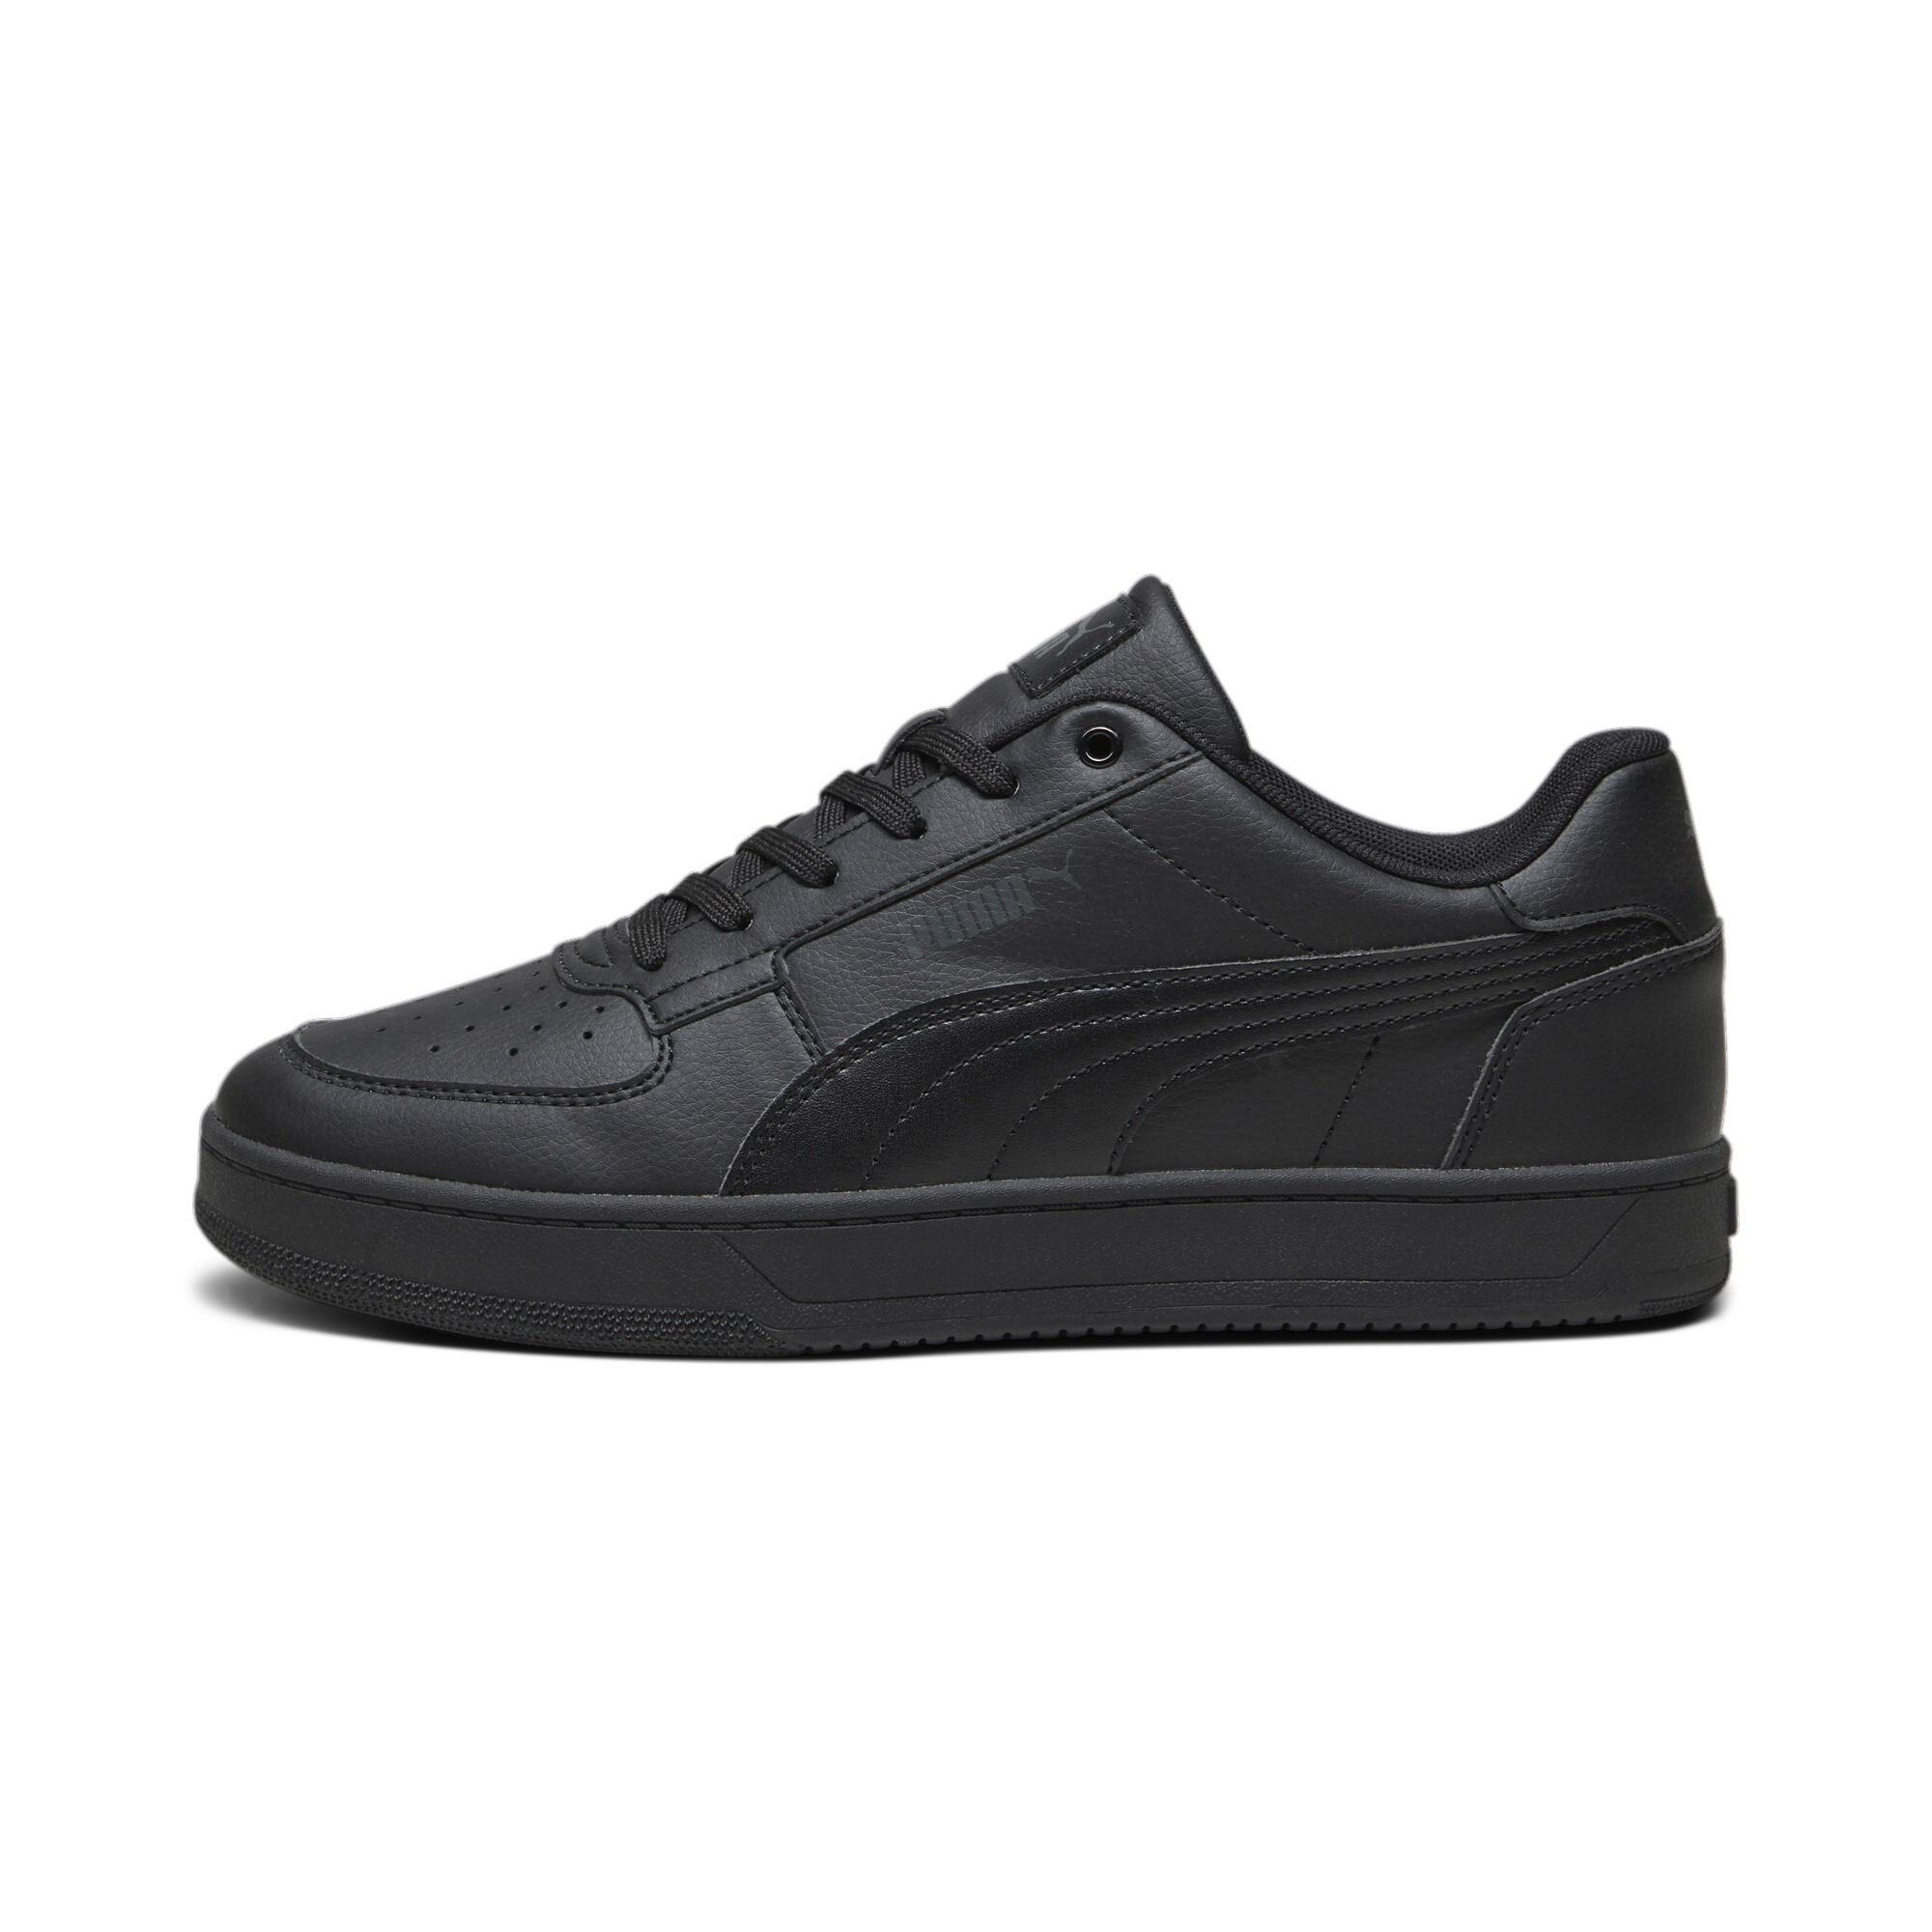 Buy Puma Caven 2.0 Mid PS Sneakers (11.5-3) Boys Footwear from Puma. Find  Puma fashion & more at